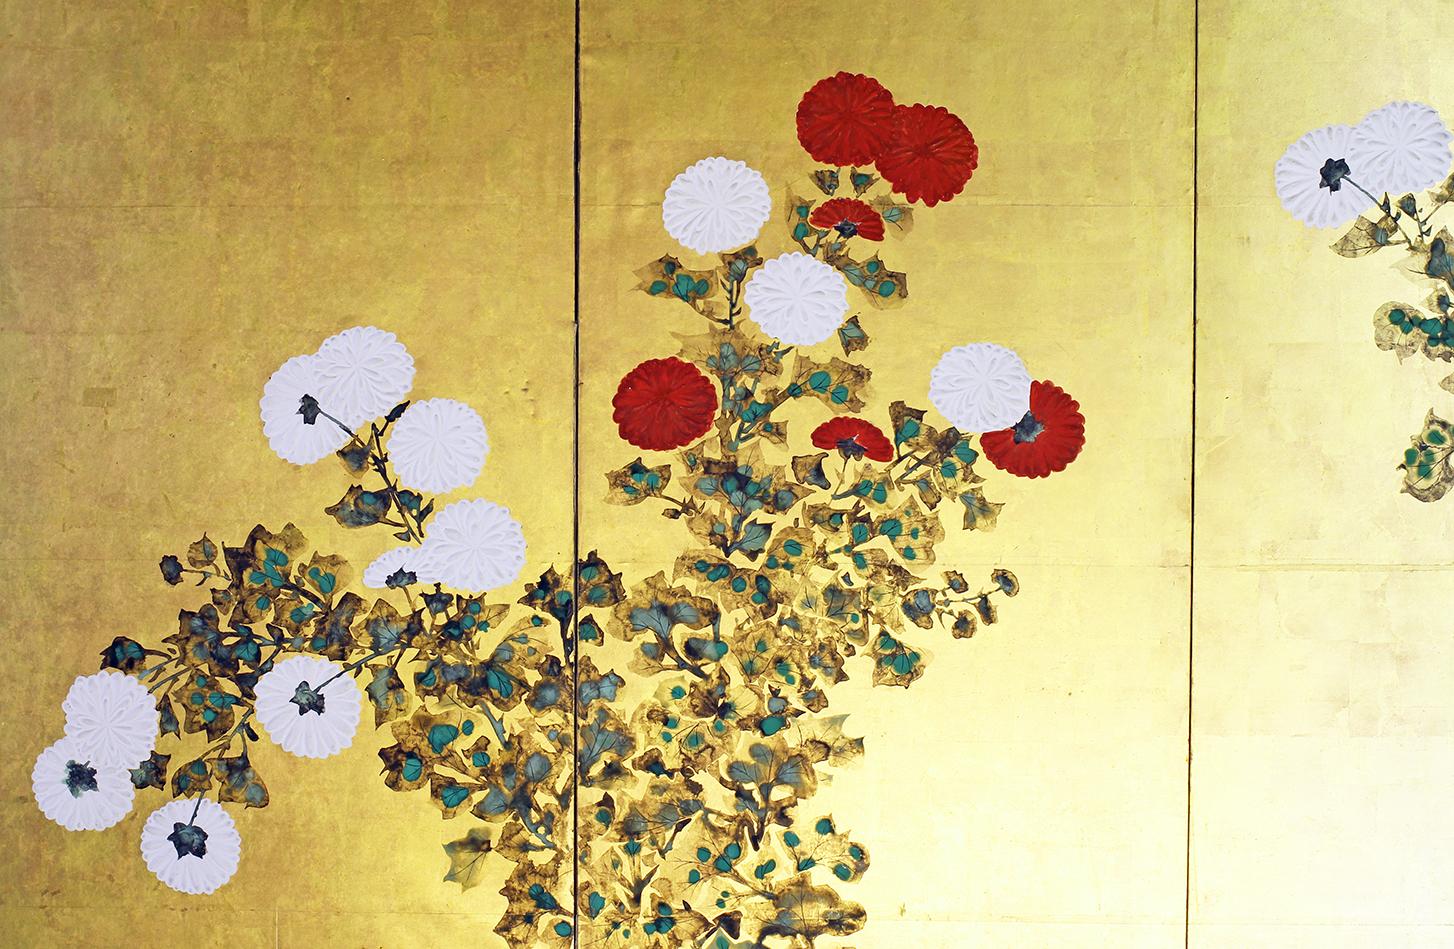 Spring landscape by an unknown painter of the Rinpa school, 19th century, six-panel ink painted on gold leaf on rice paper.
The flowers are made with the 